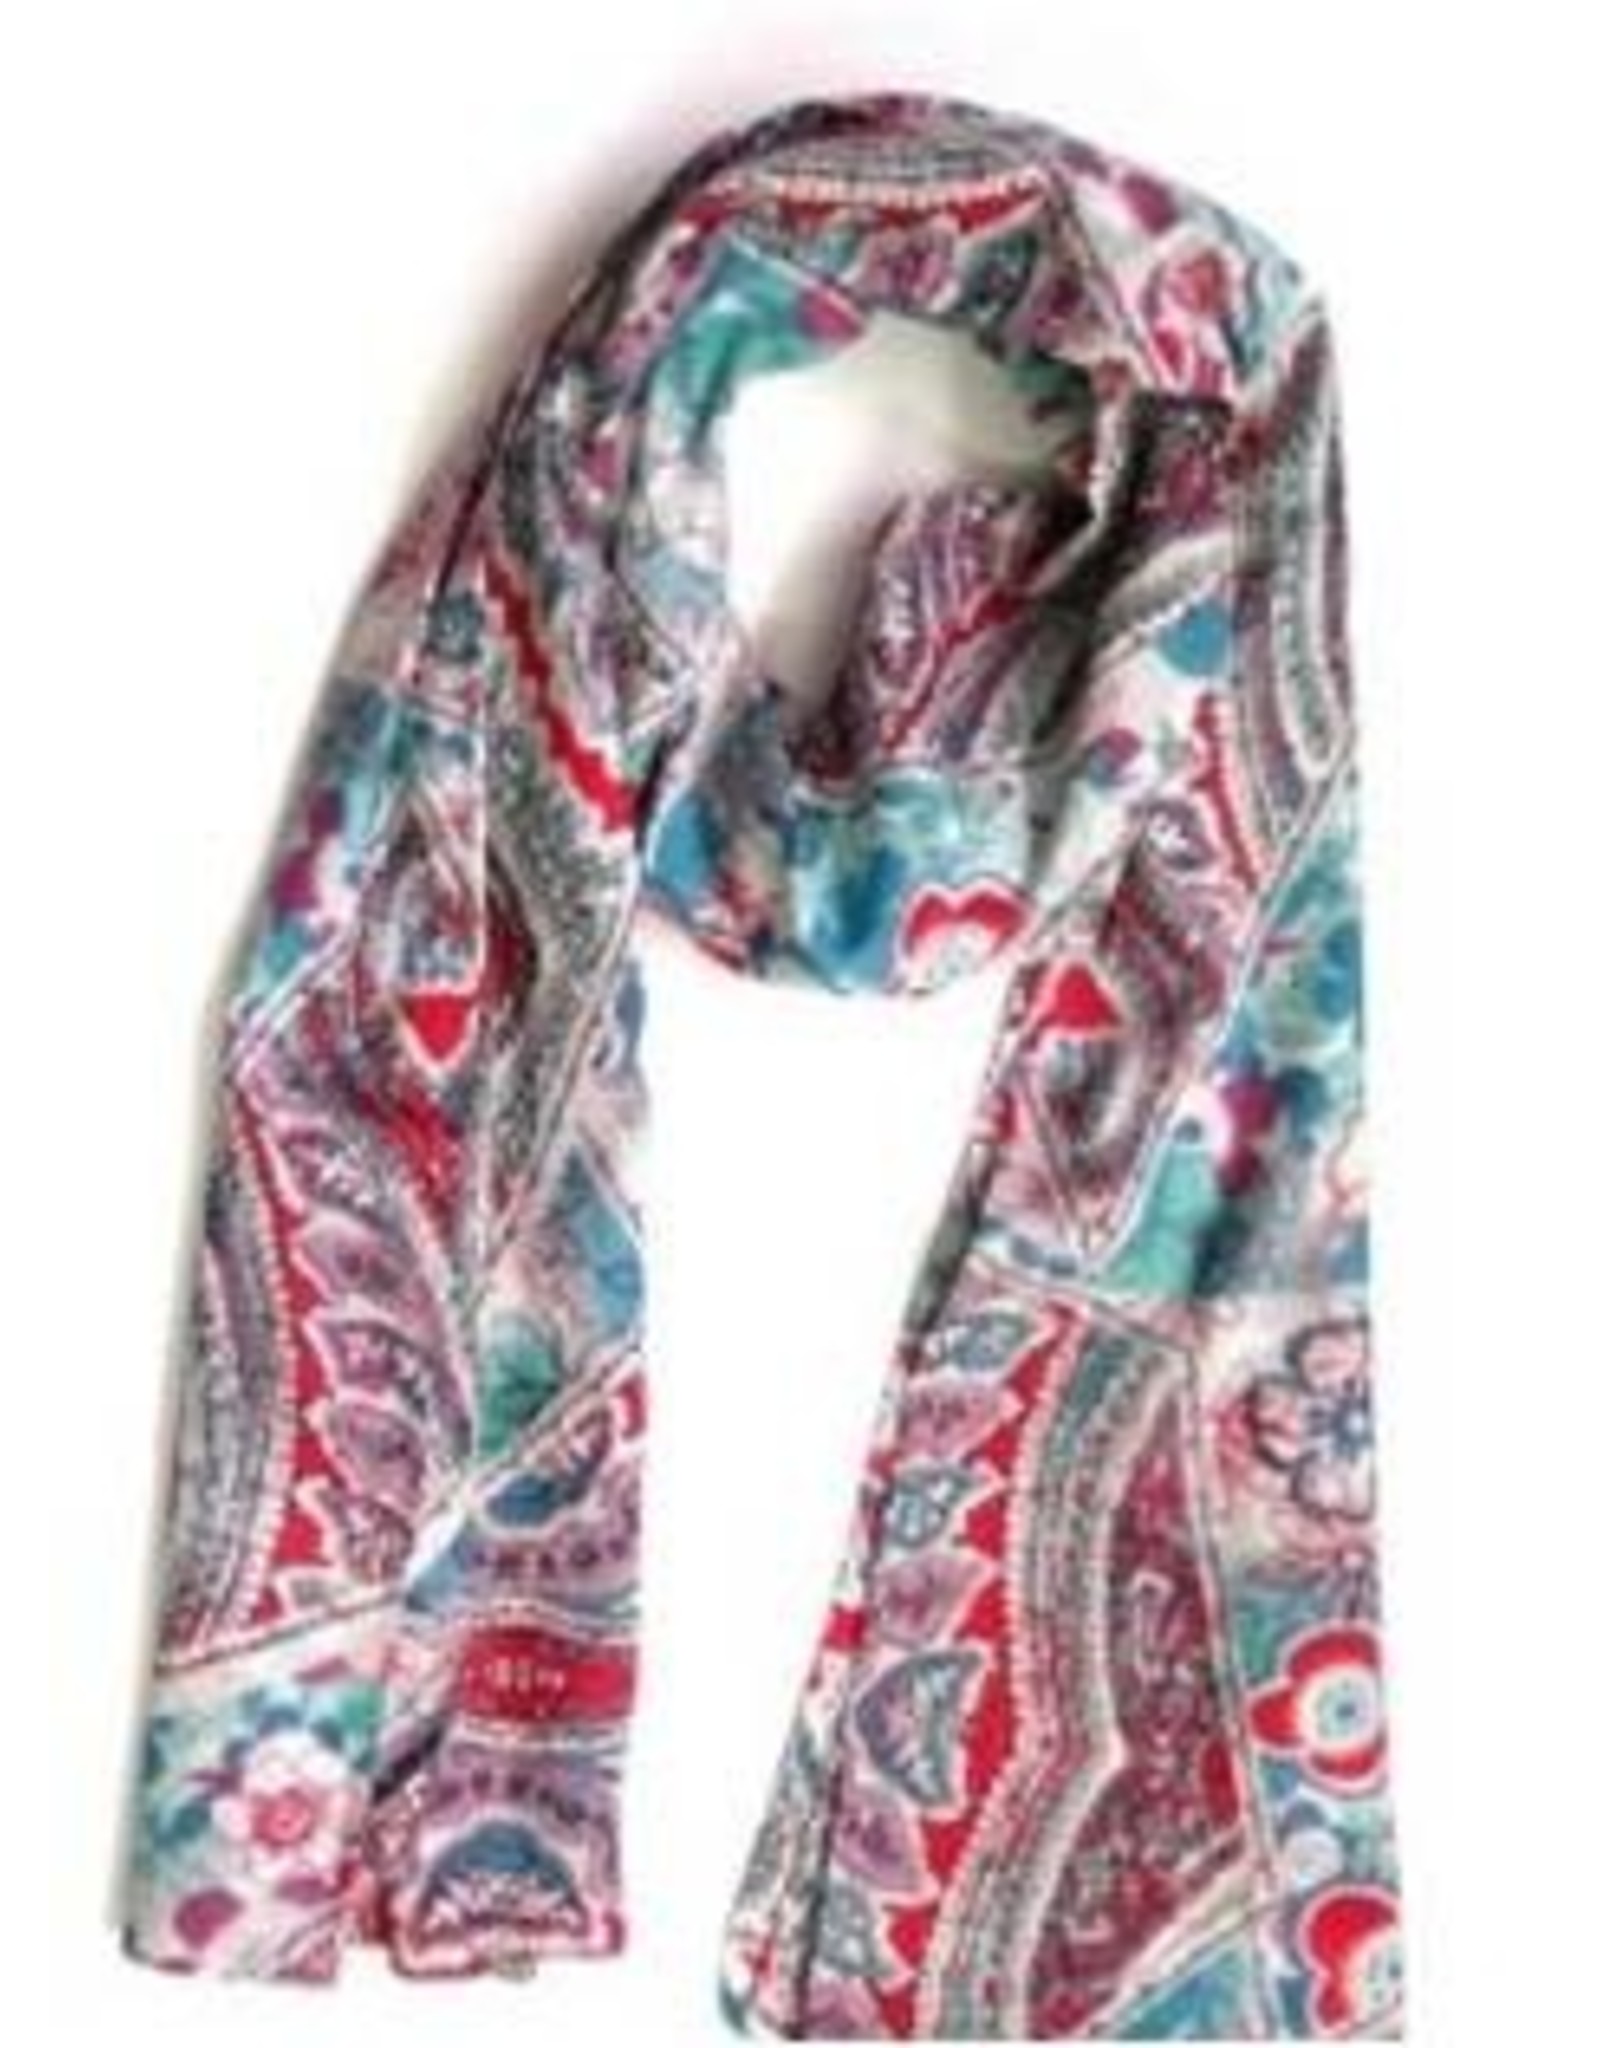 Trade roots 100% Modal Cotton Pink Paisley Scarf, India